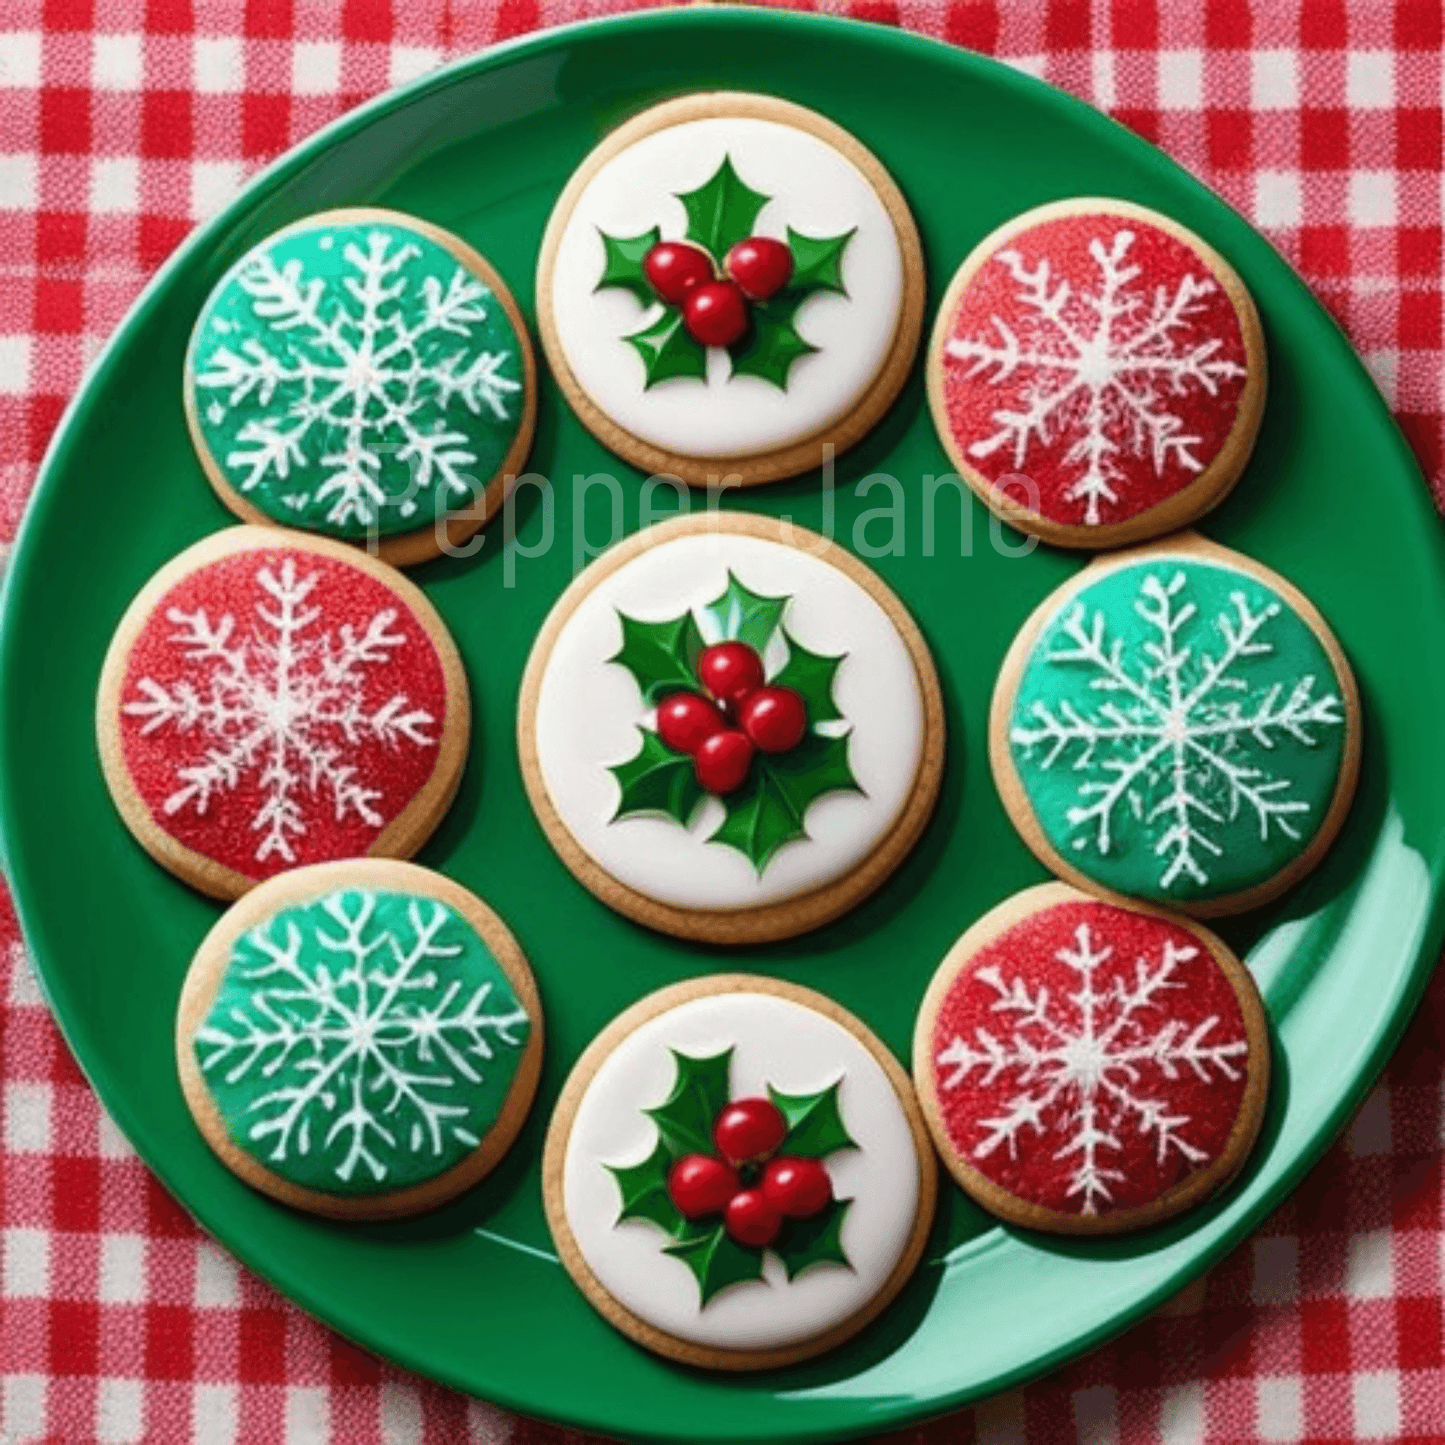 Christmas Cookies Fragrance Oil - Pepper Jane's Colors and Scents